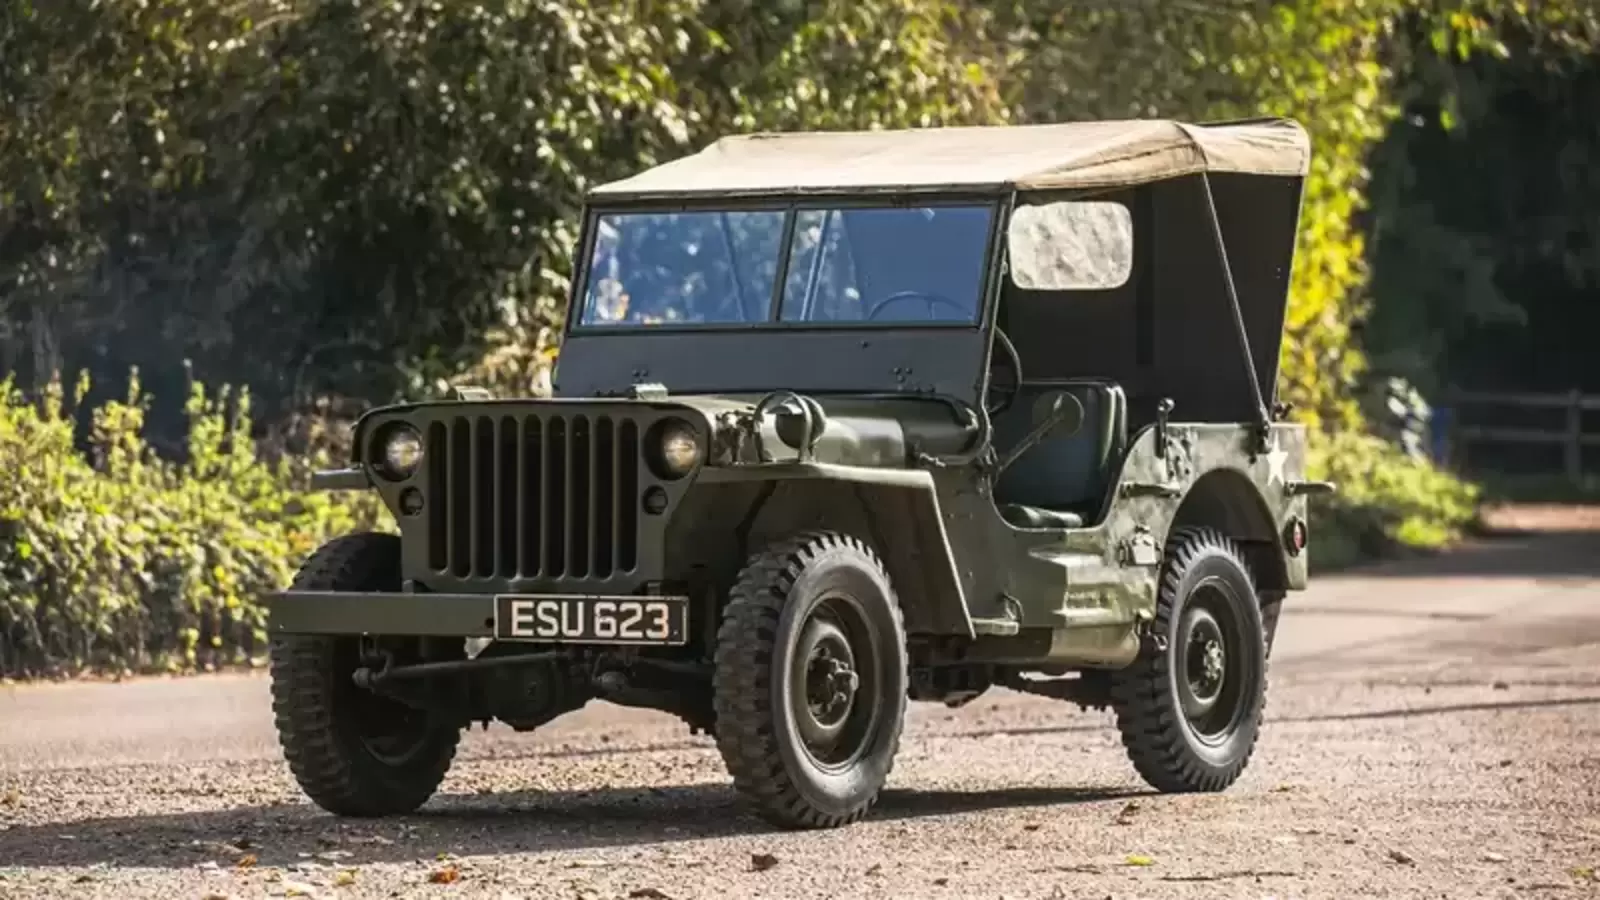 This World War II era Willys Jeep could be yours. Here's how